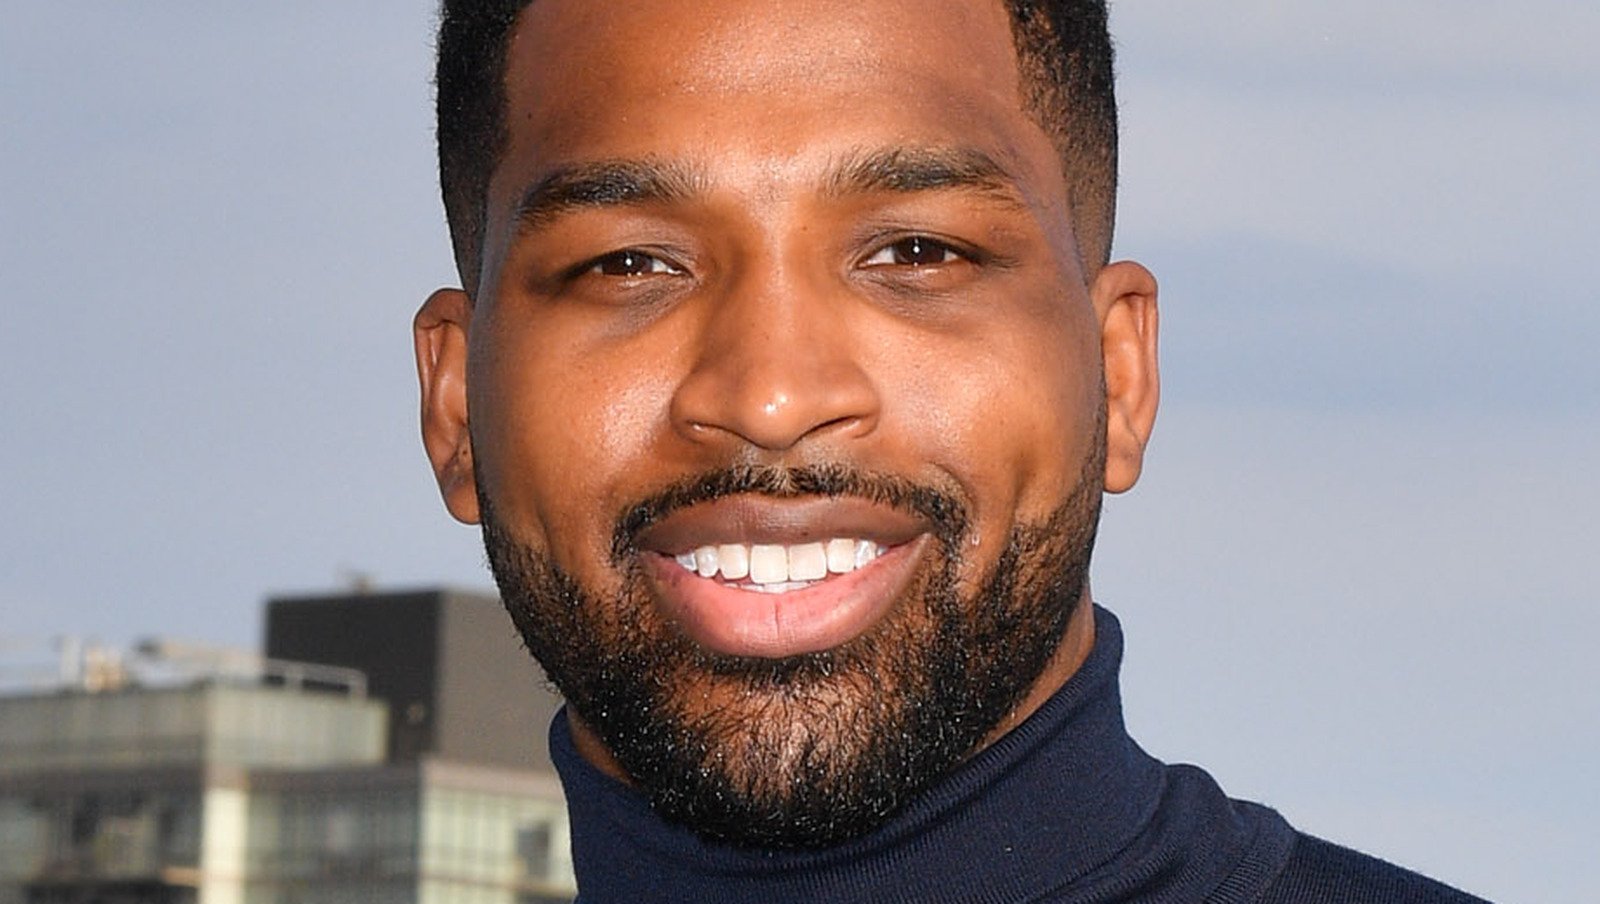 What NBA Team Does Tristan Thompson Play For?